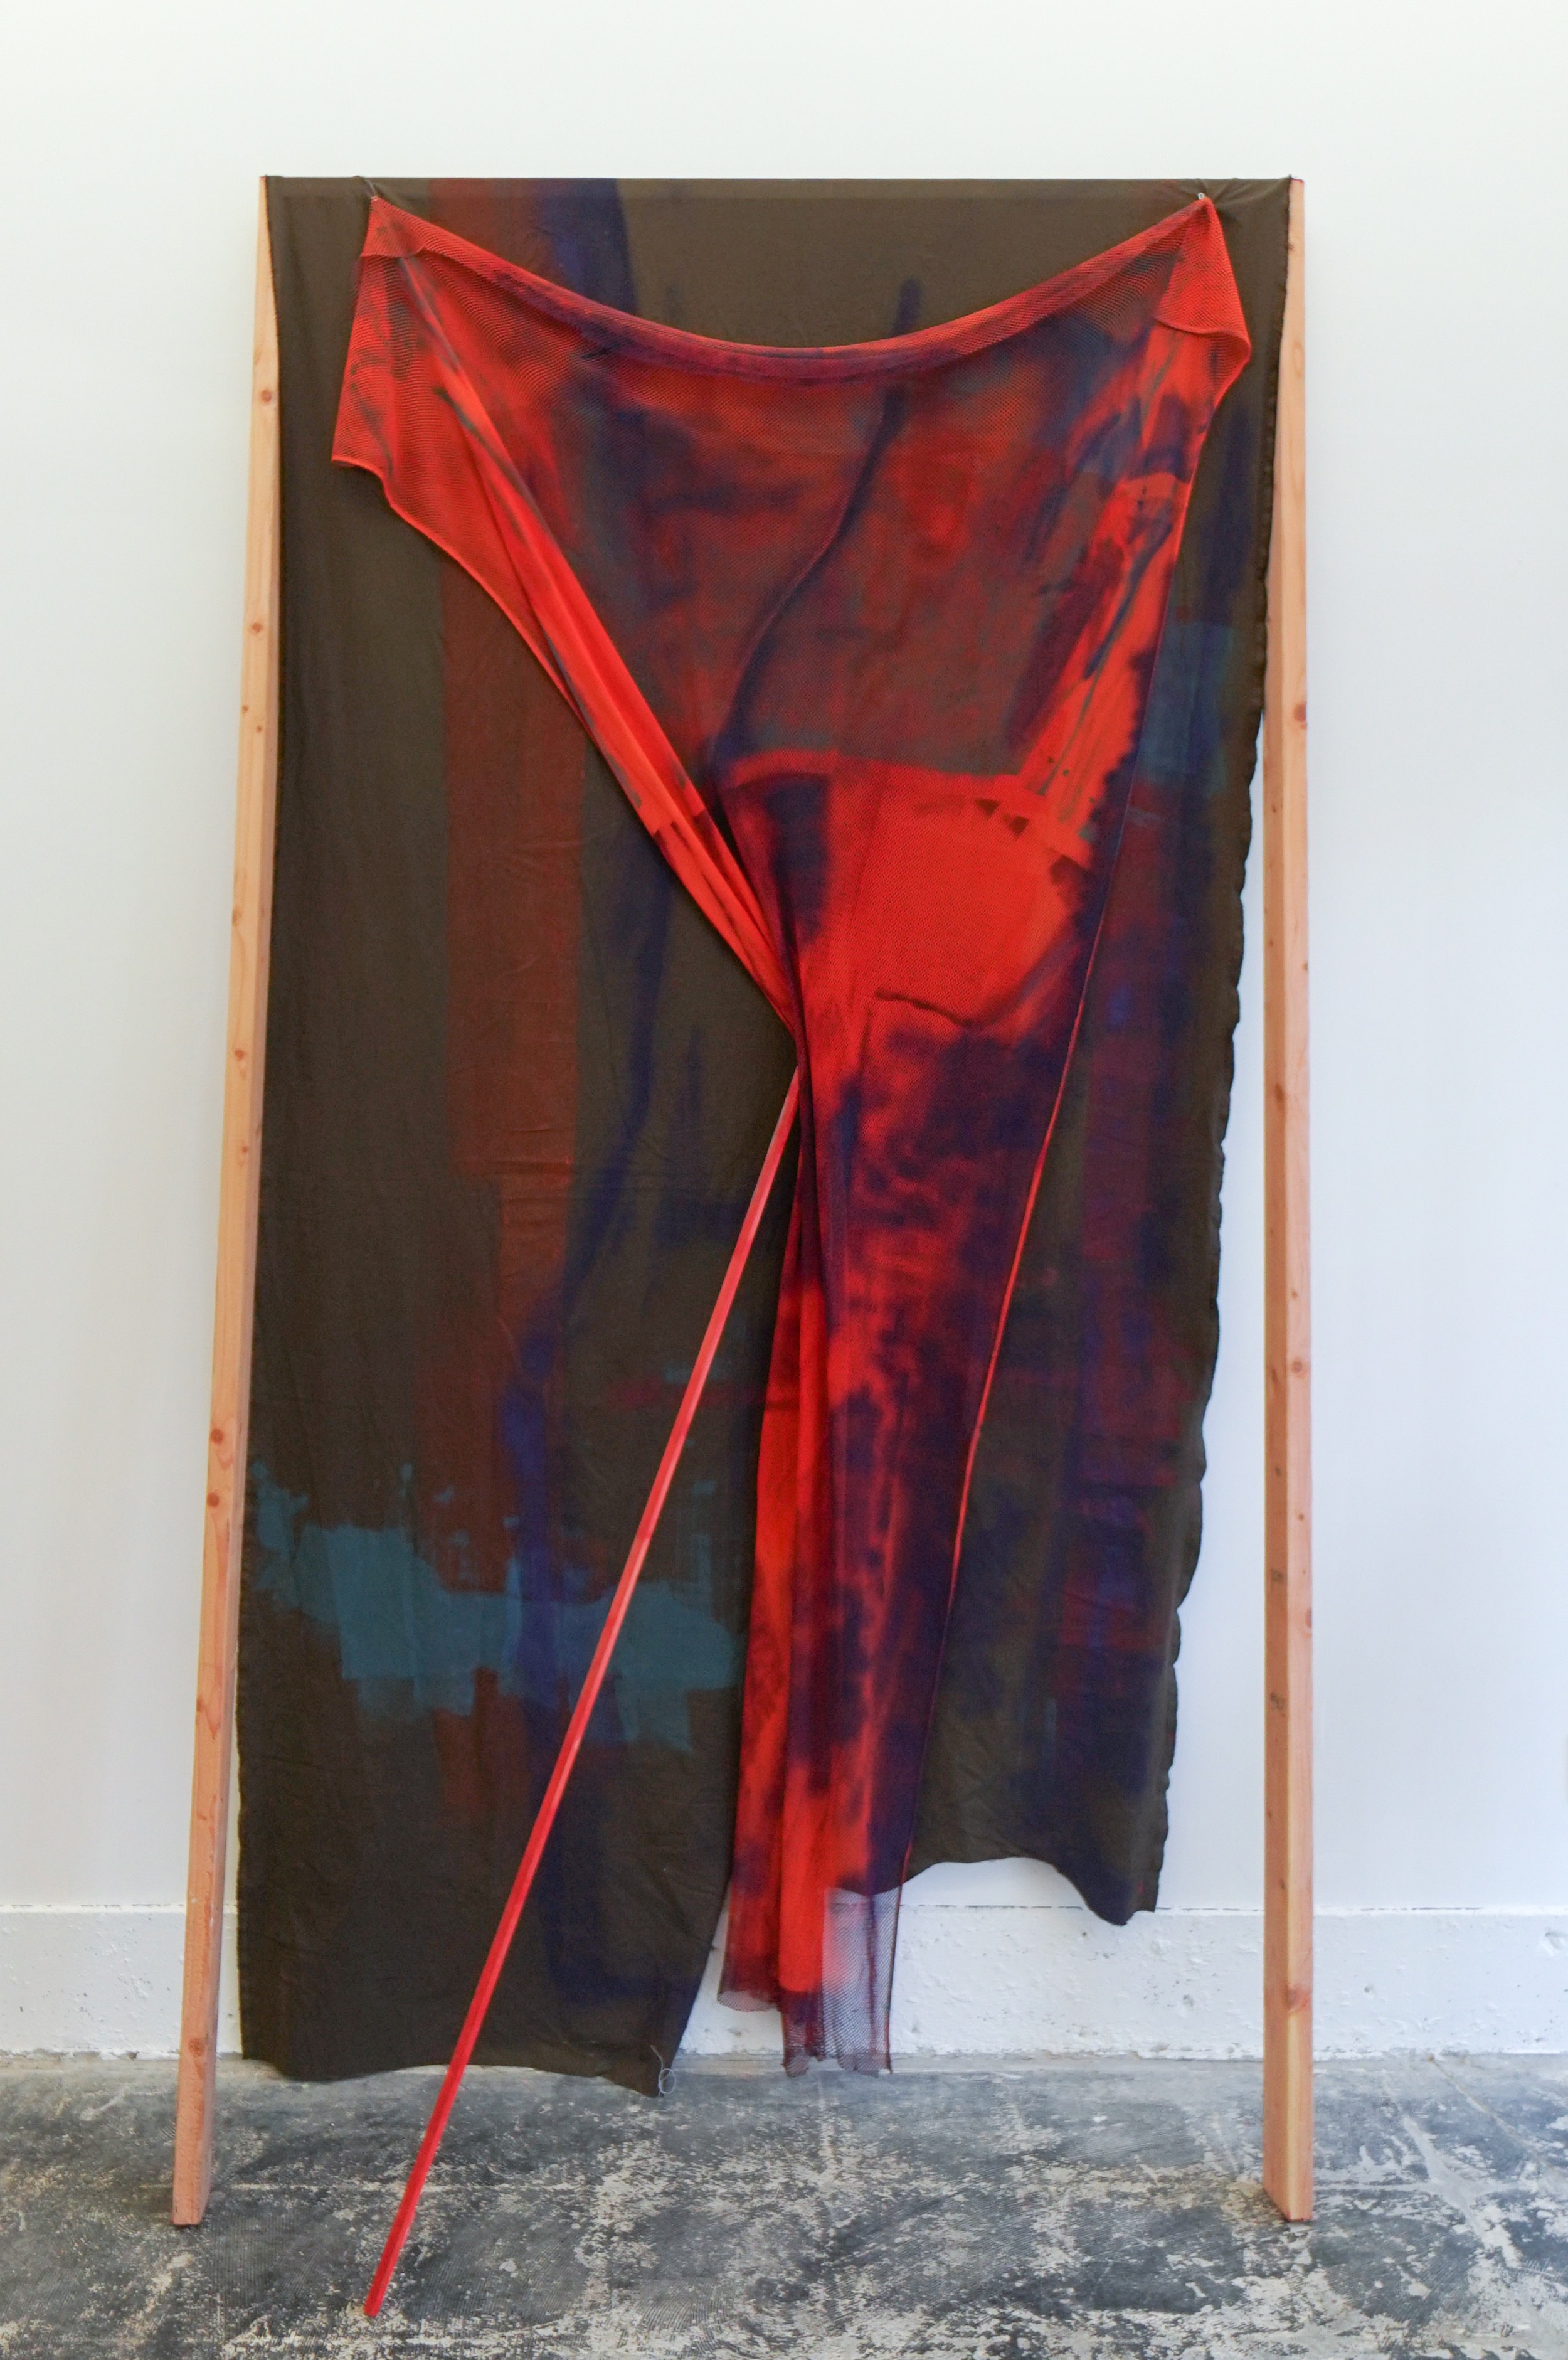  Cybele Lyle  The Desert in Four Parts (6) , 2018 Fabric, paint, wood 10 x 5 feet 